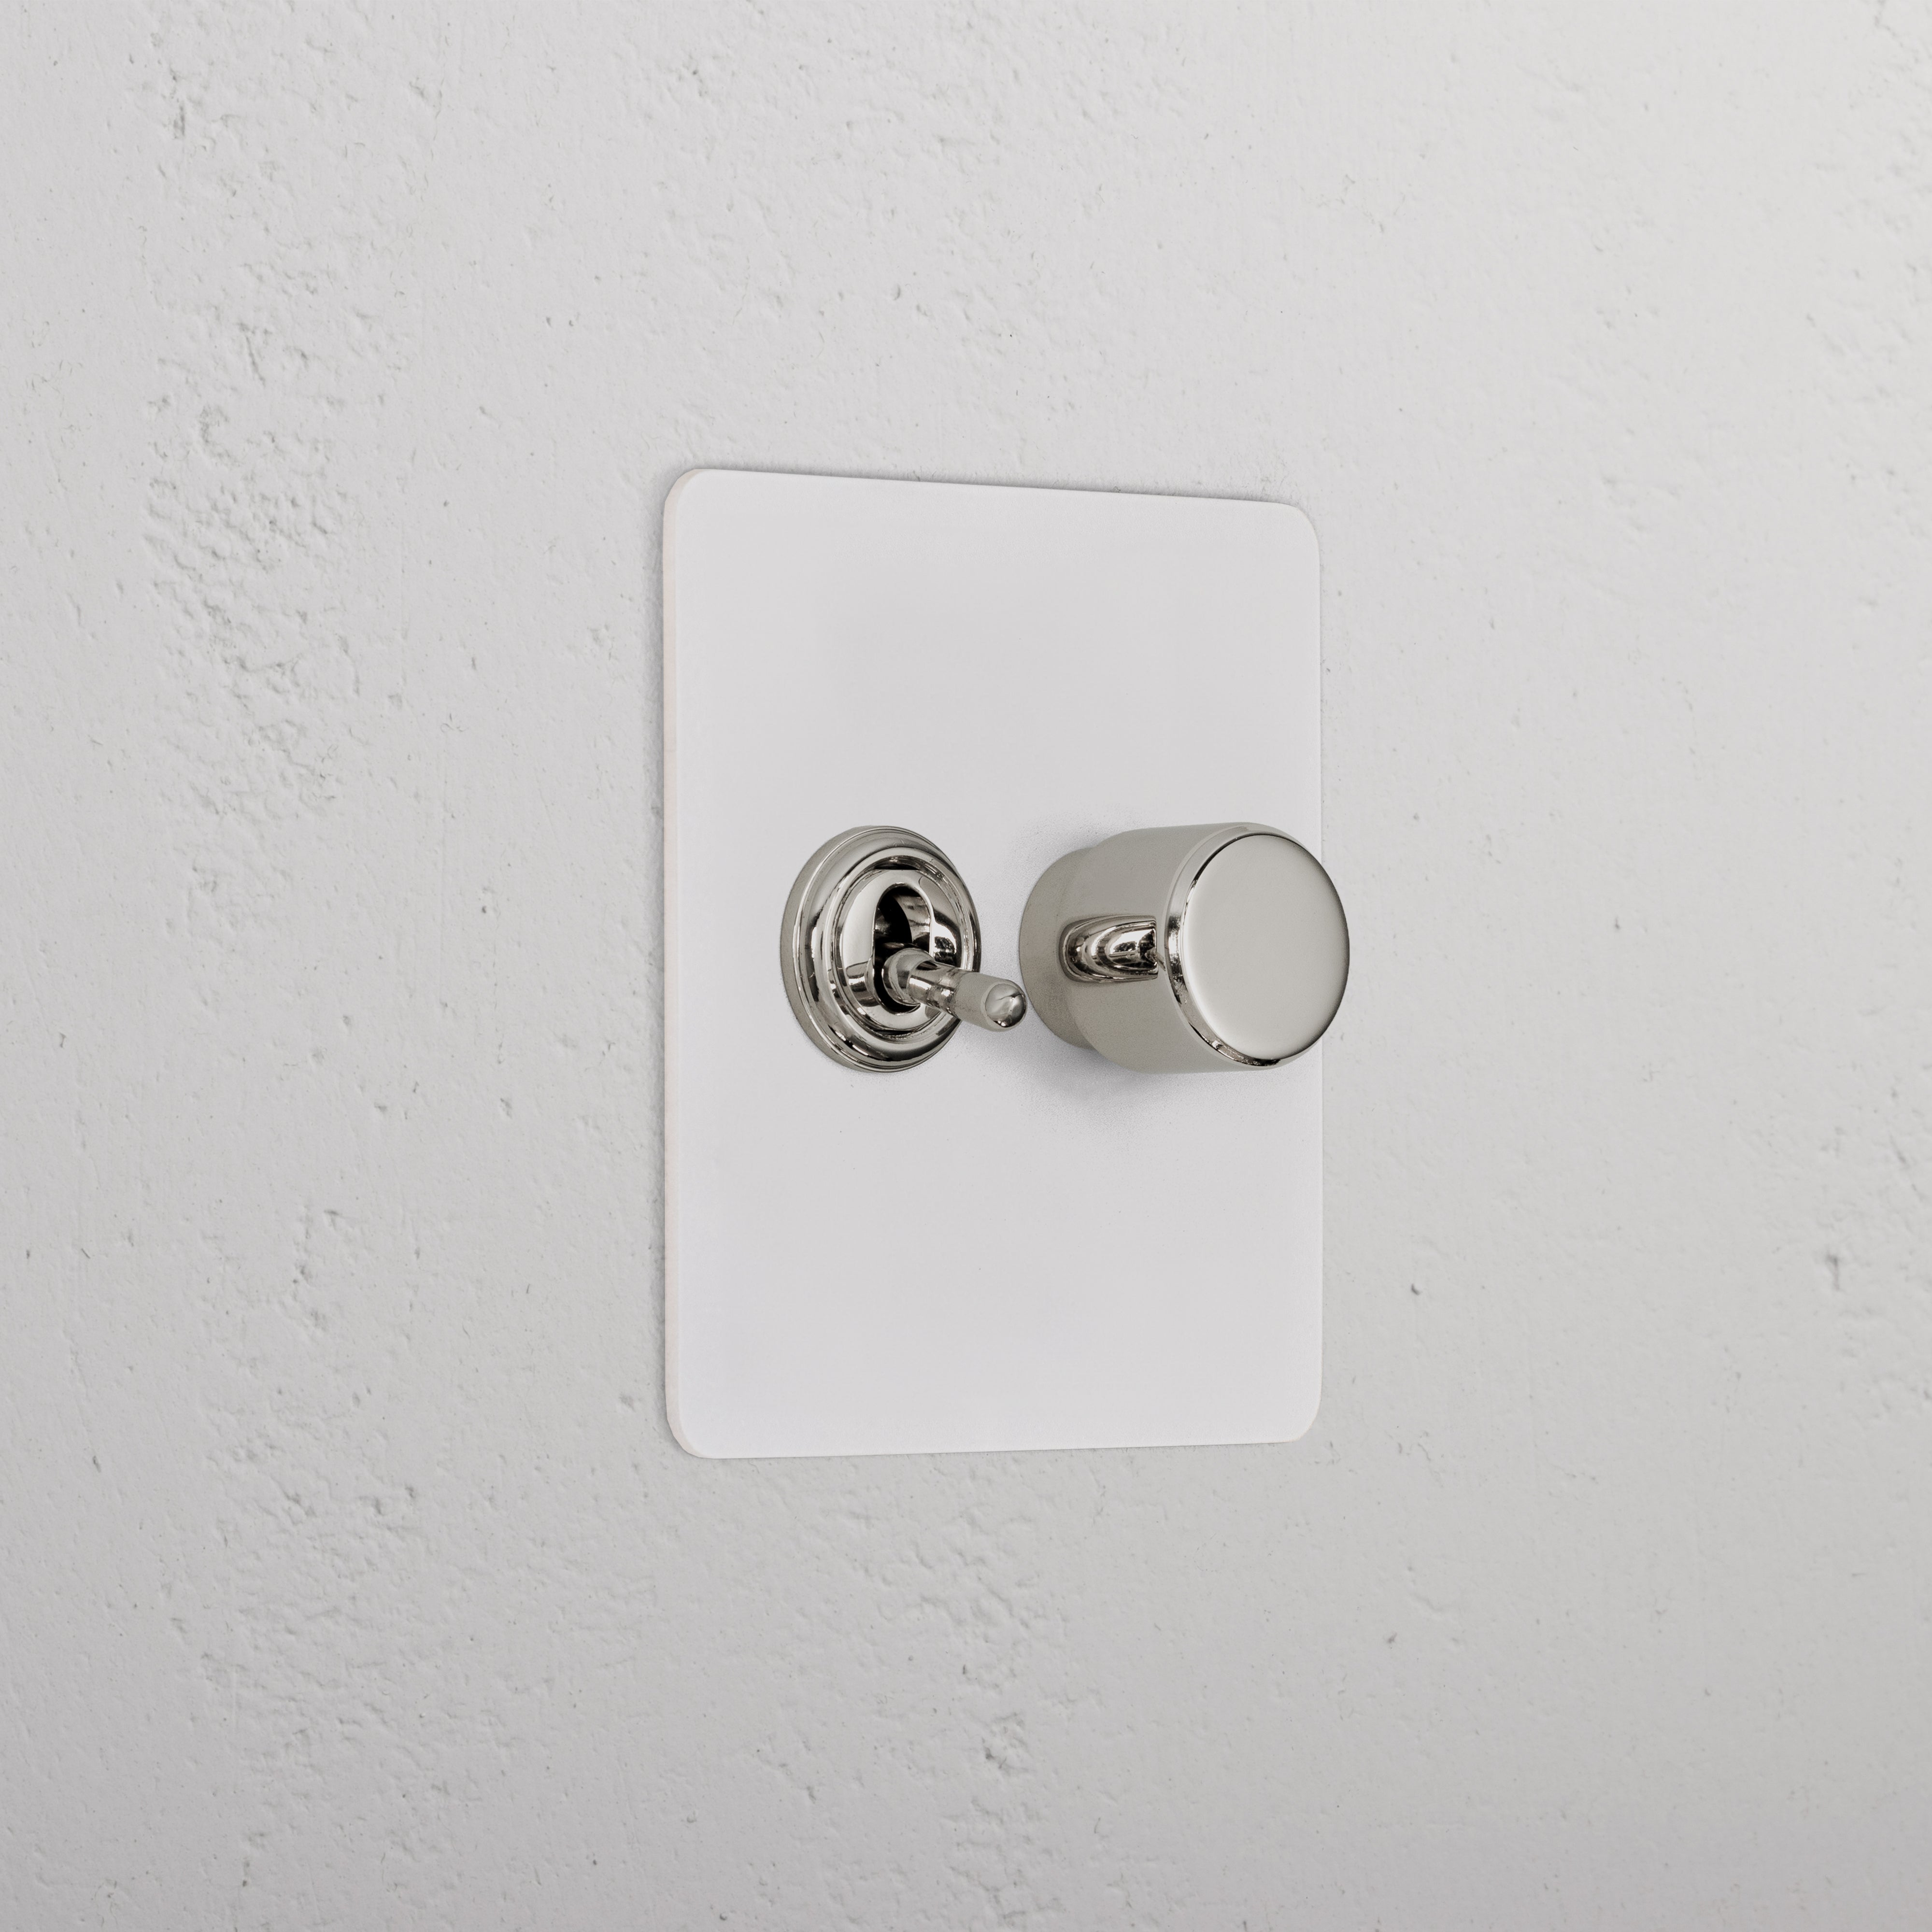 2G Mixed Slimline Switch 1T1D - Paintable Polished Nickel